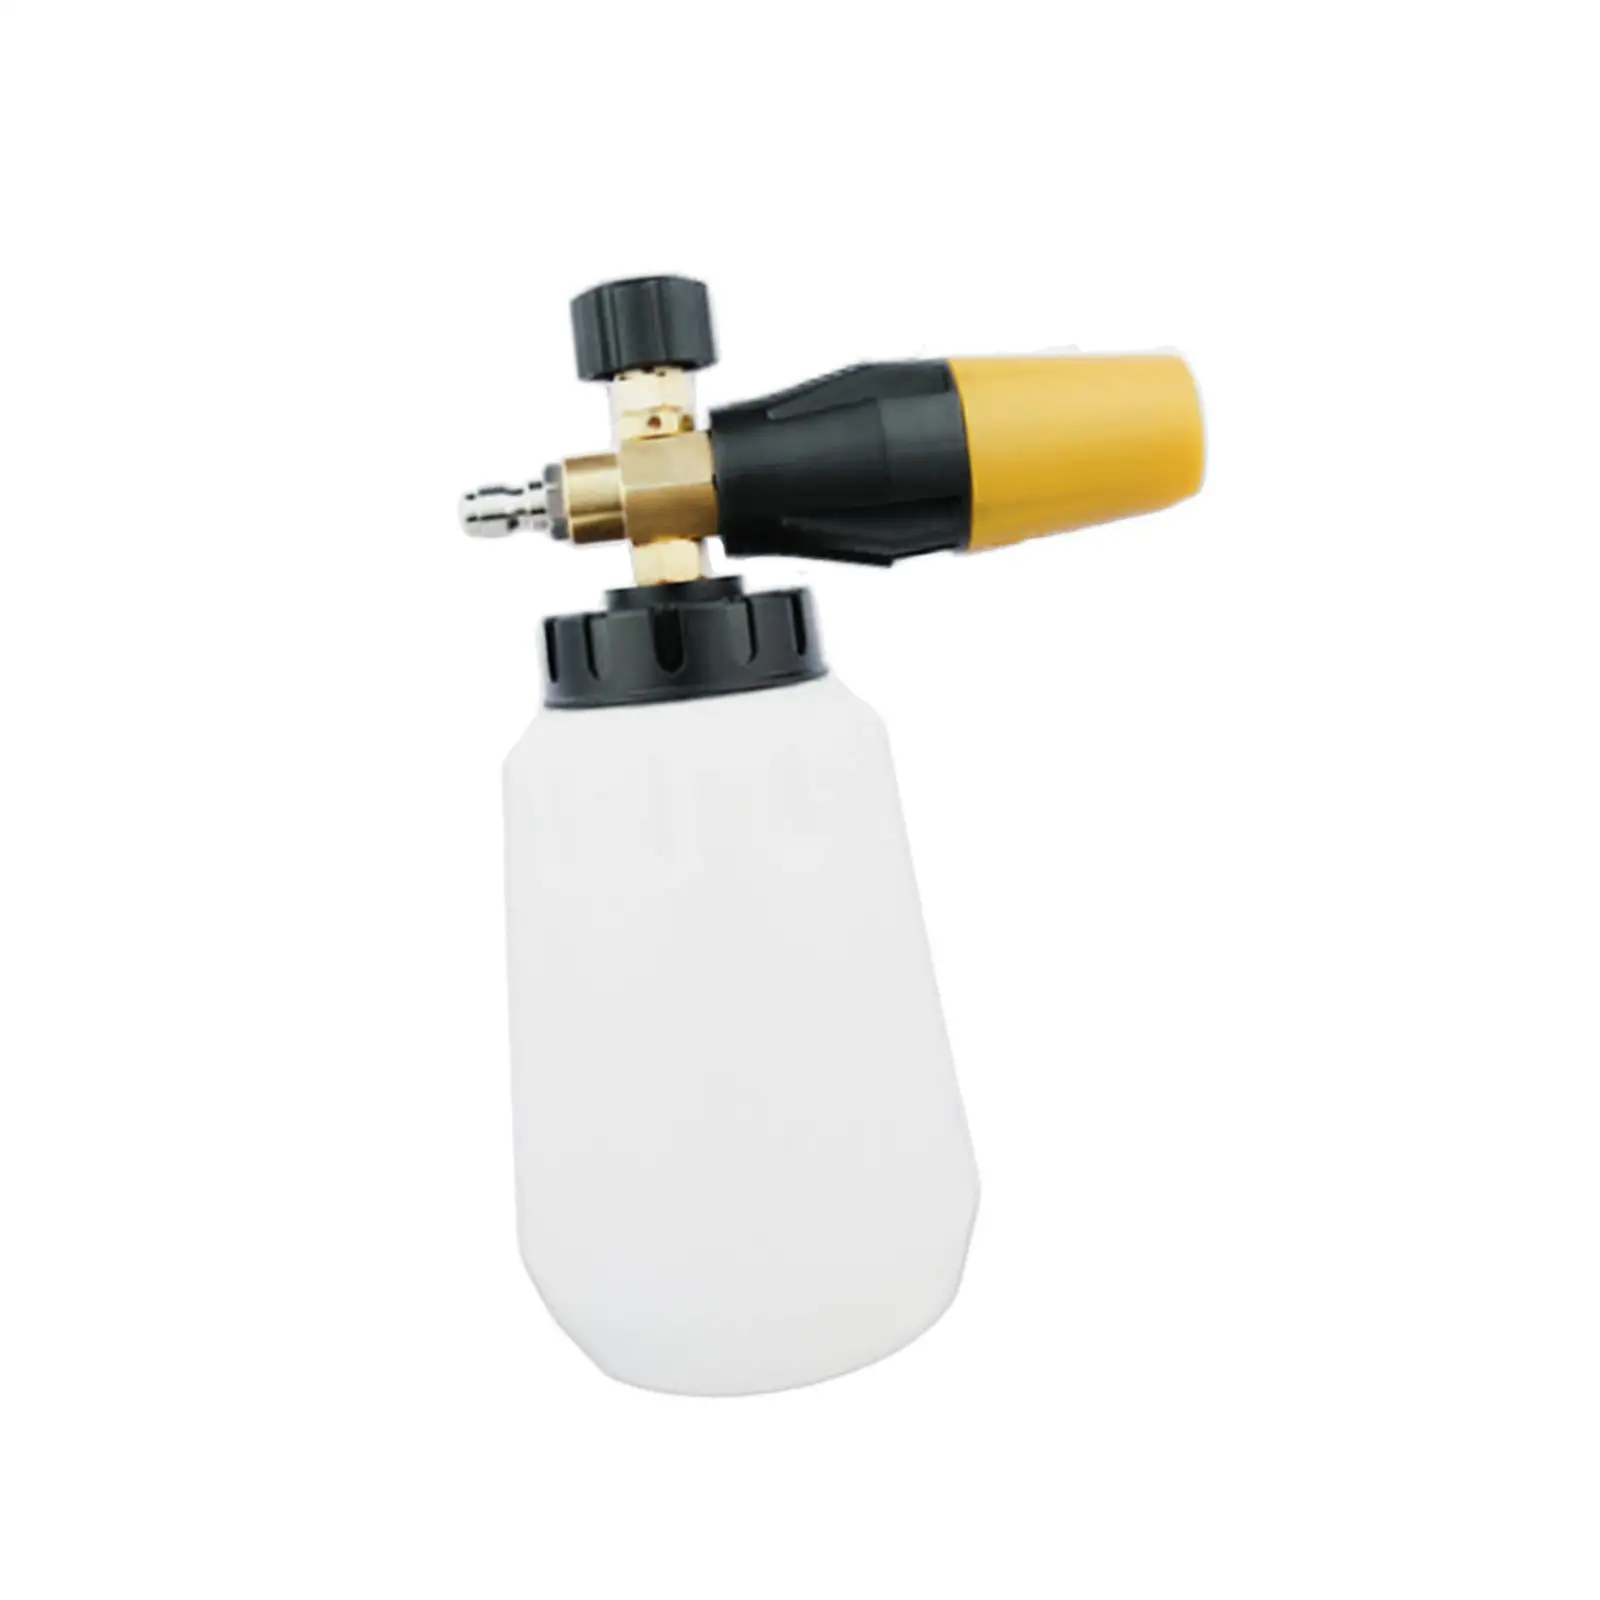  er, Foam Cars Watering Washing Tool Water Bottle High Pressure Cleaner for Garden Use